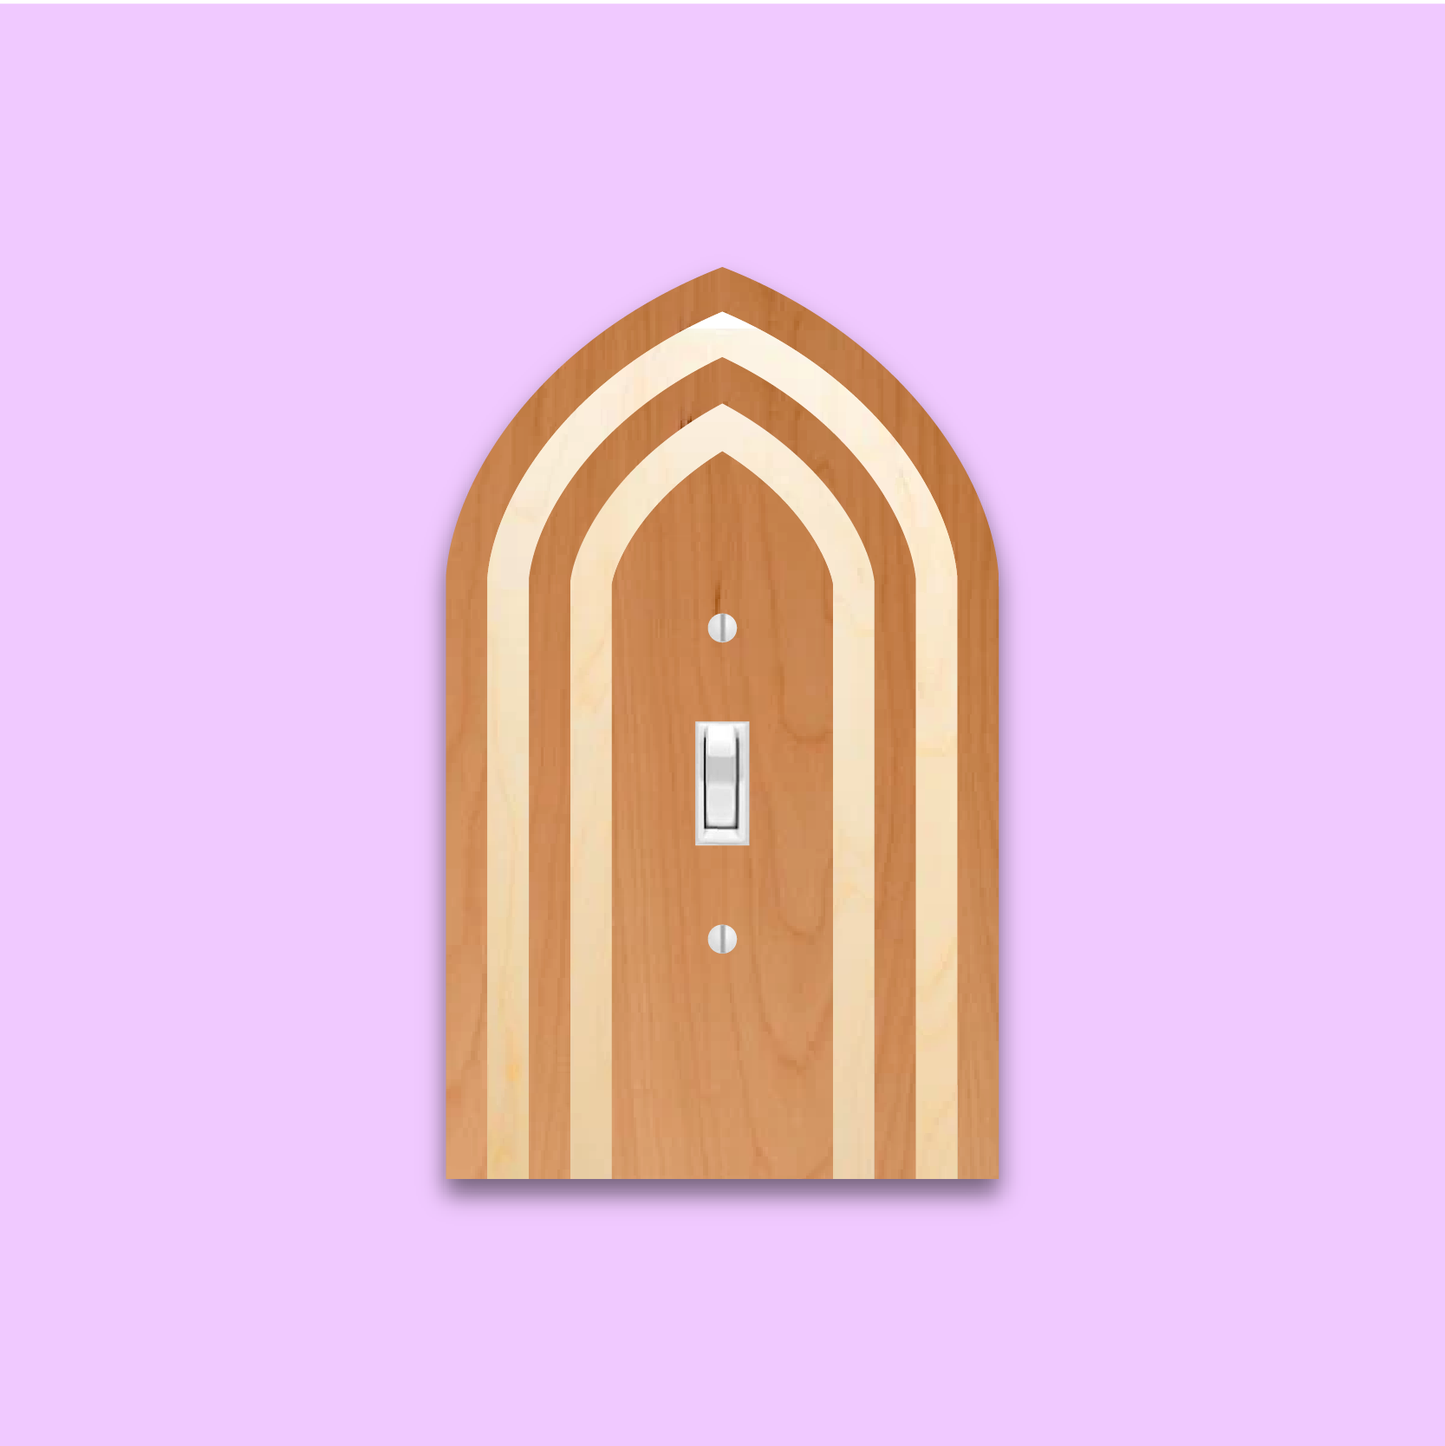 Pointed Arch light switch cover